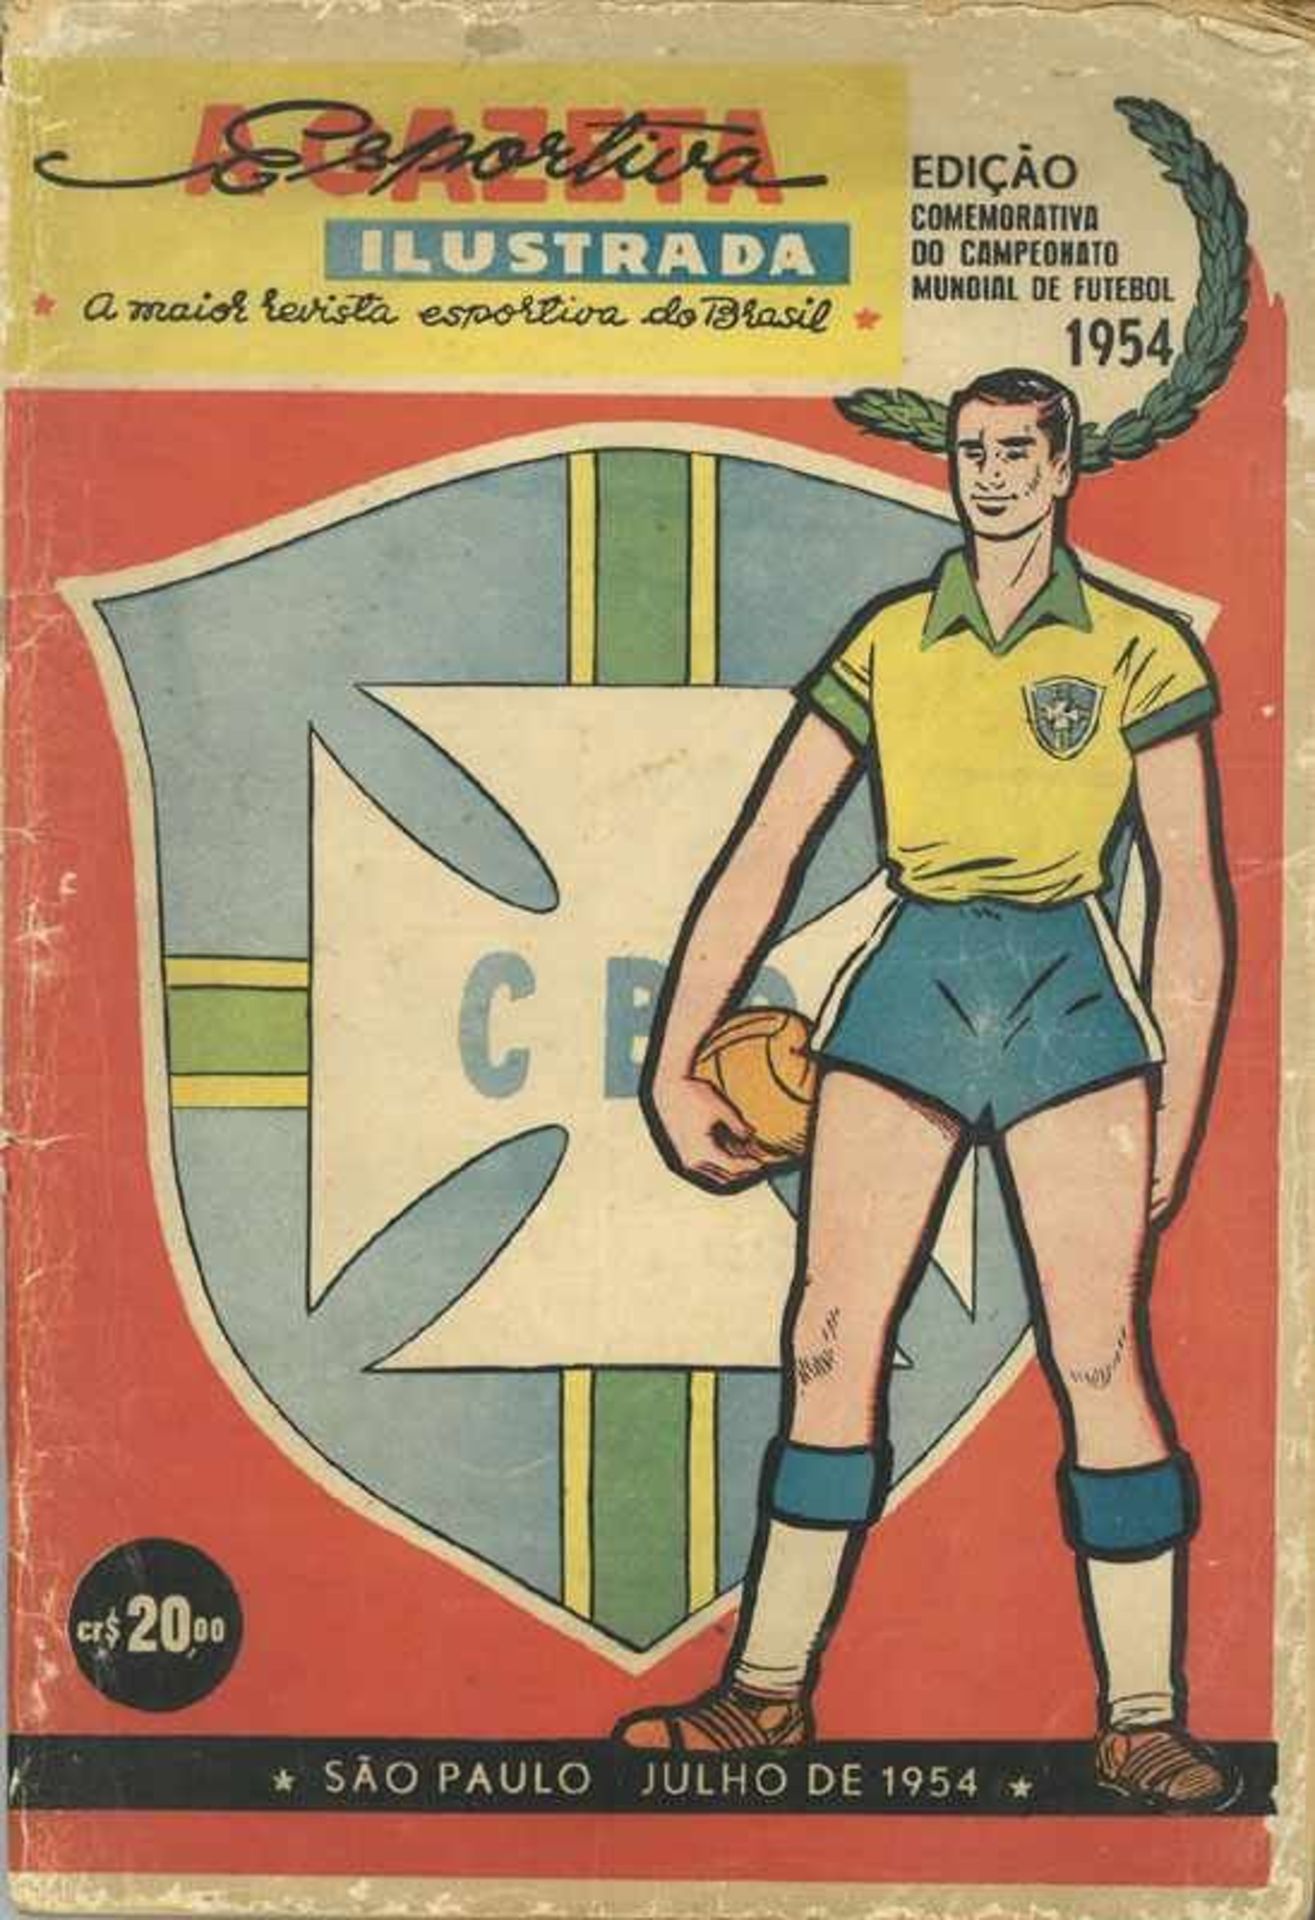 World Cup 1954. Rare Brasilian report - WC 1954: Brasilian report of the World Cup 1954 in